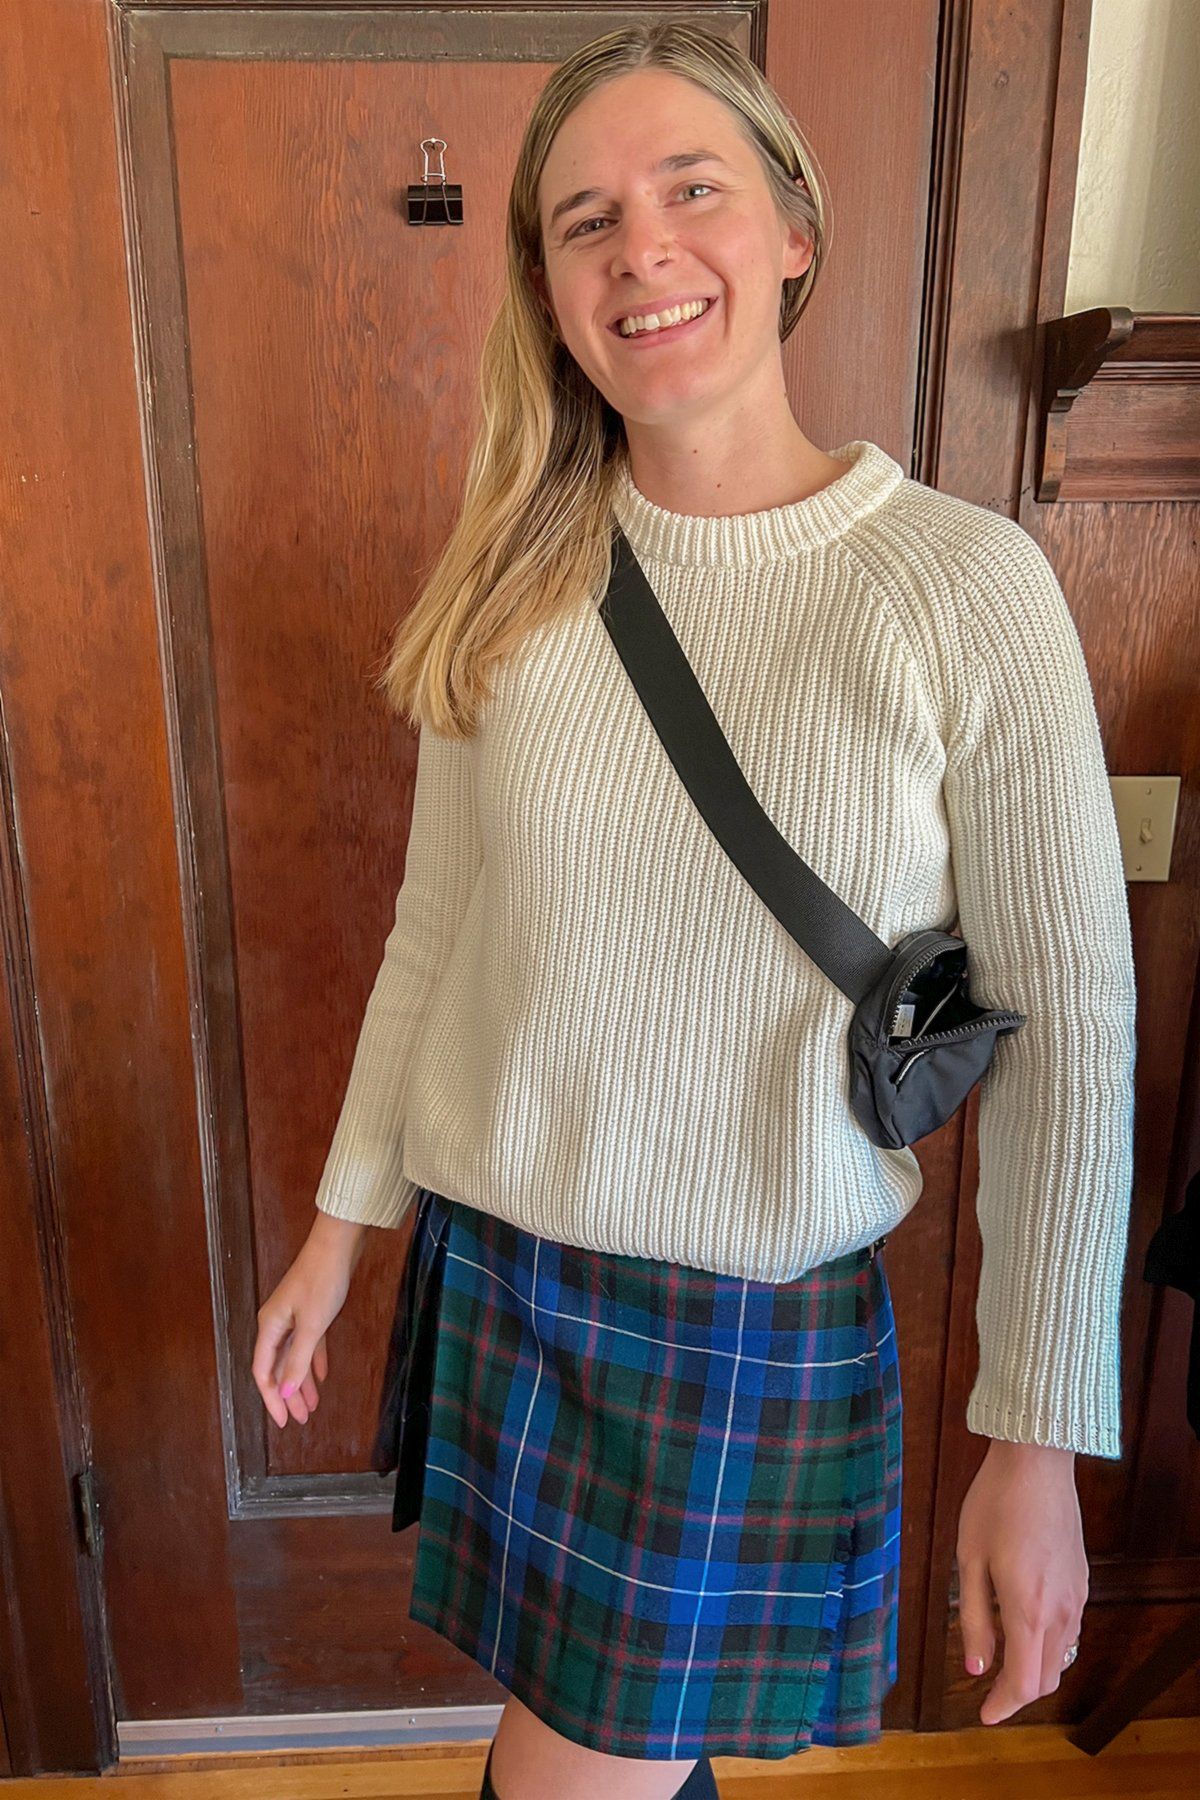 A young woman wearing a white sweater and a blue plaid skirt stands smiles at the camera in front of a hardwood interior.